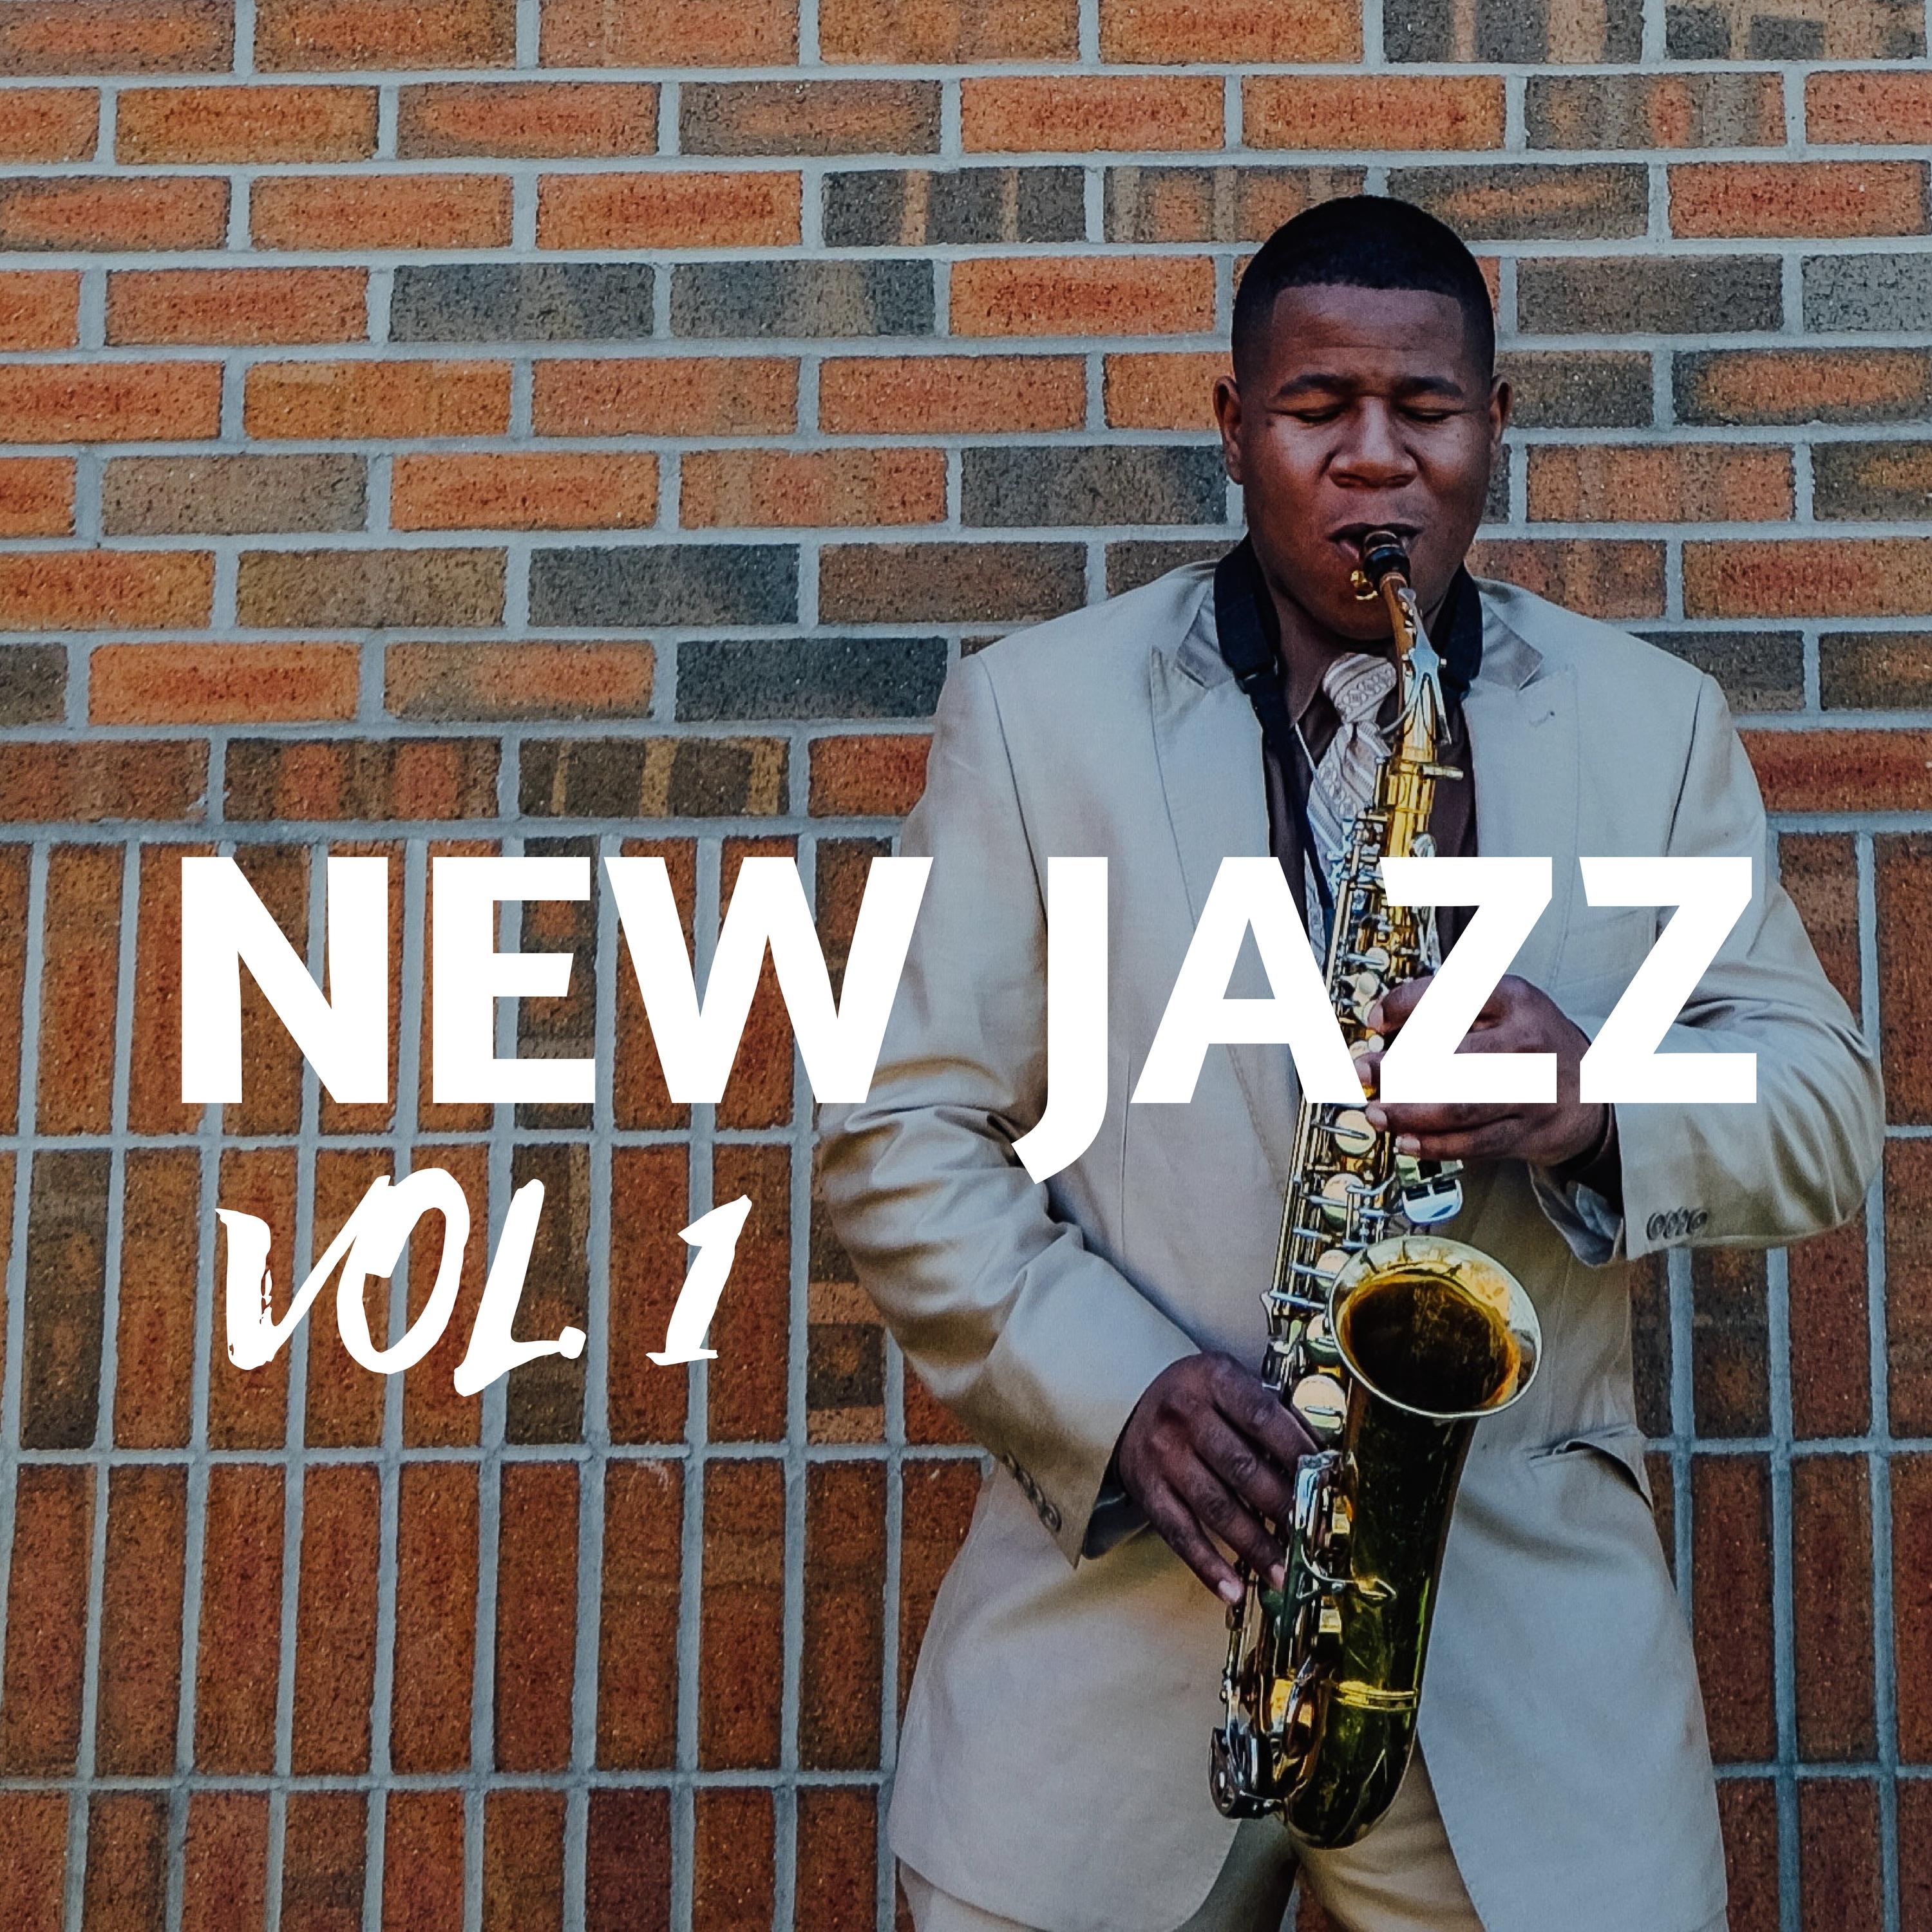 New Jazz Vol. 1: What I Like About You